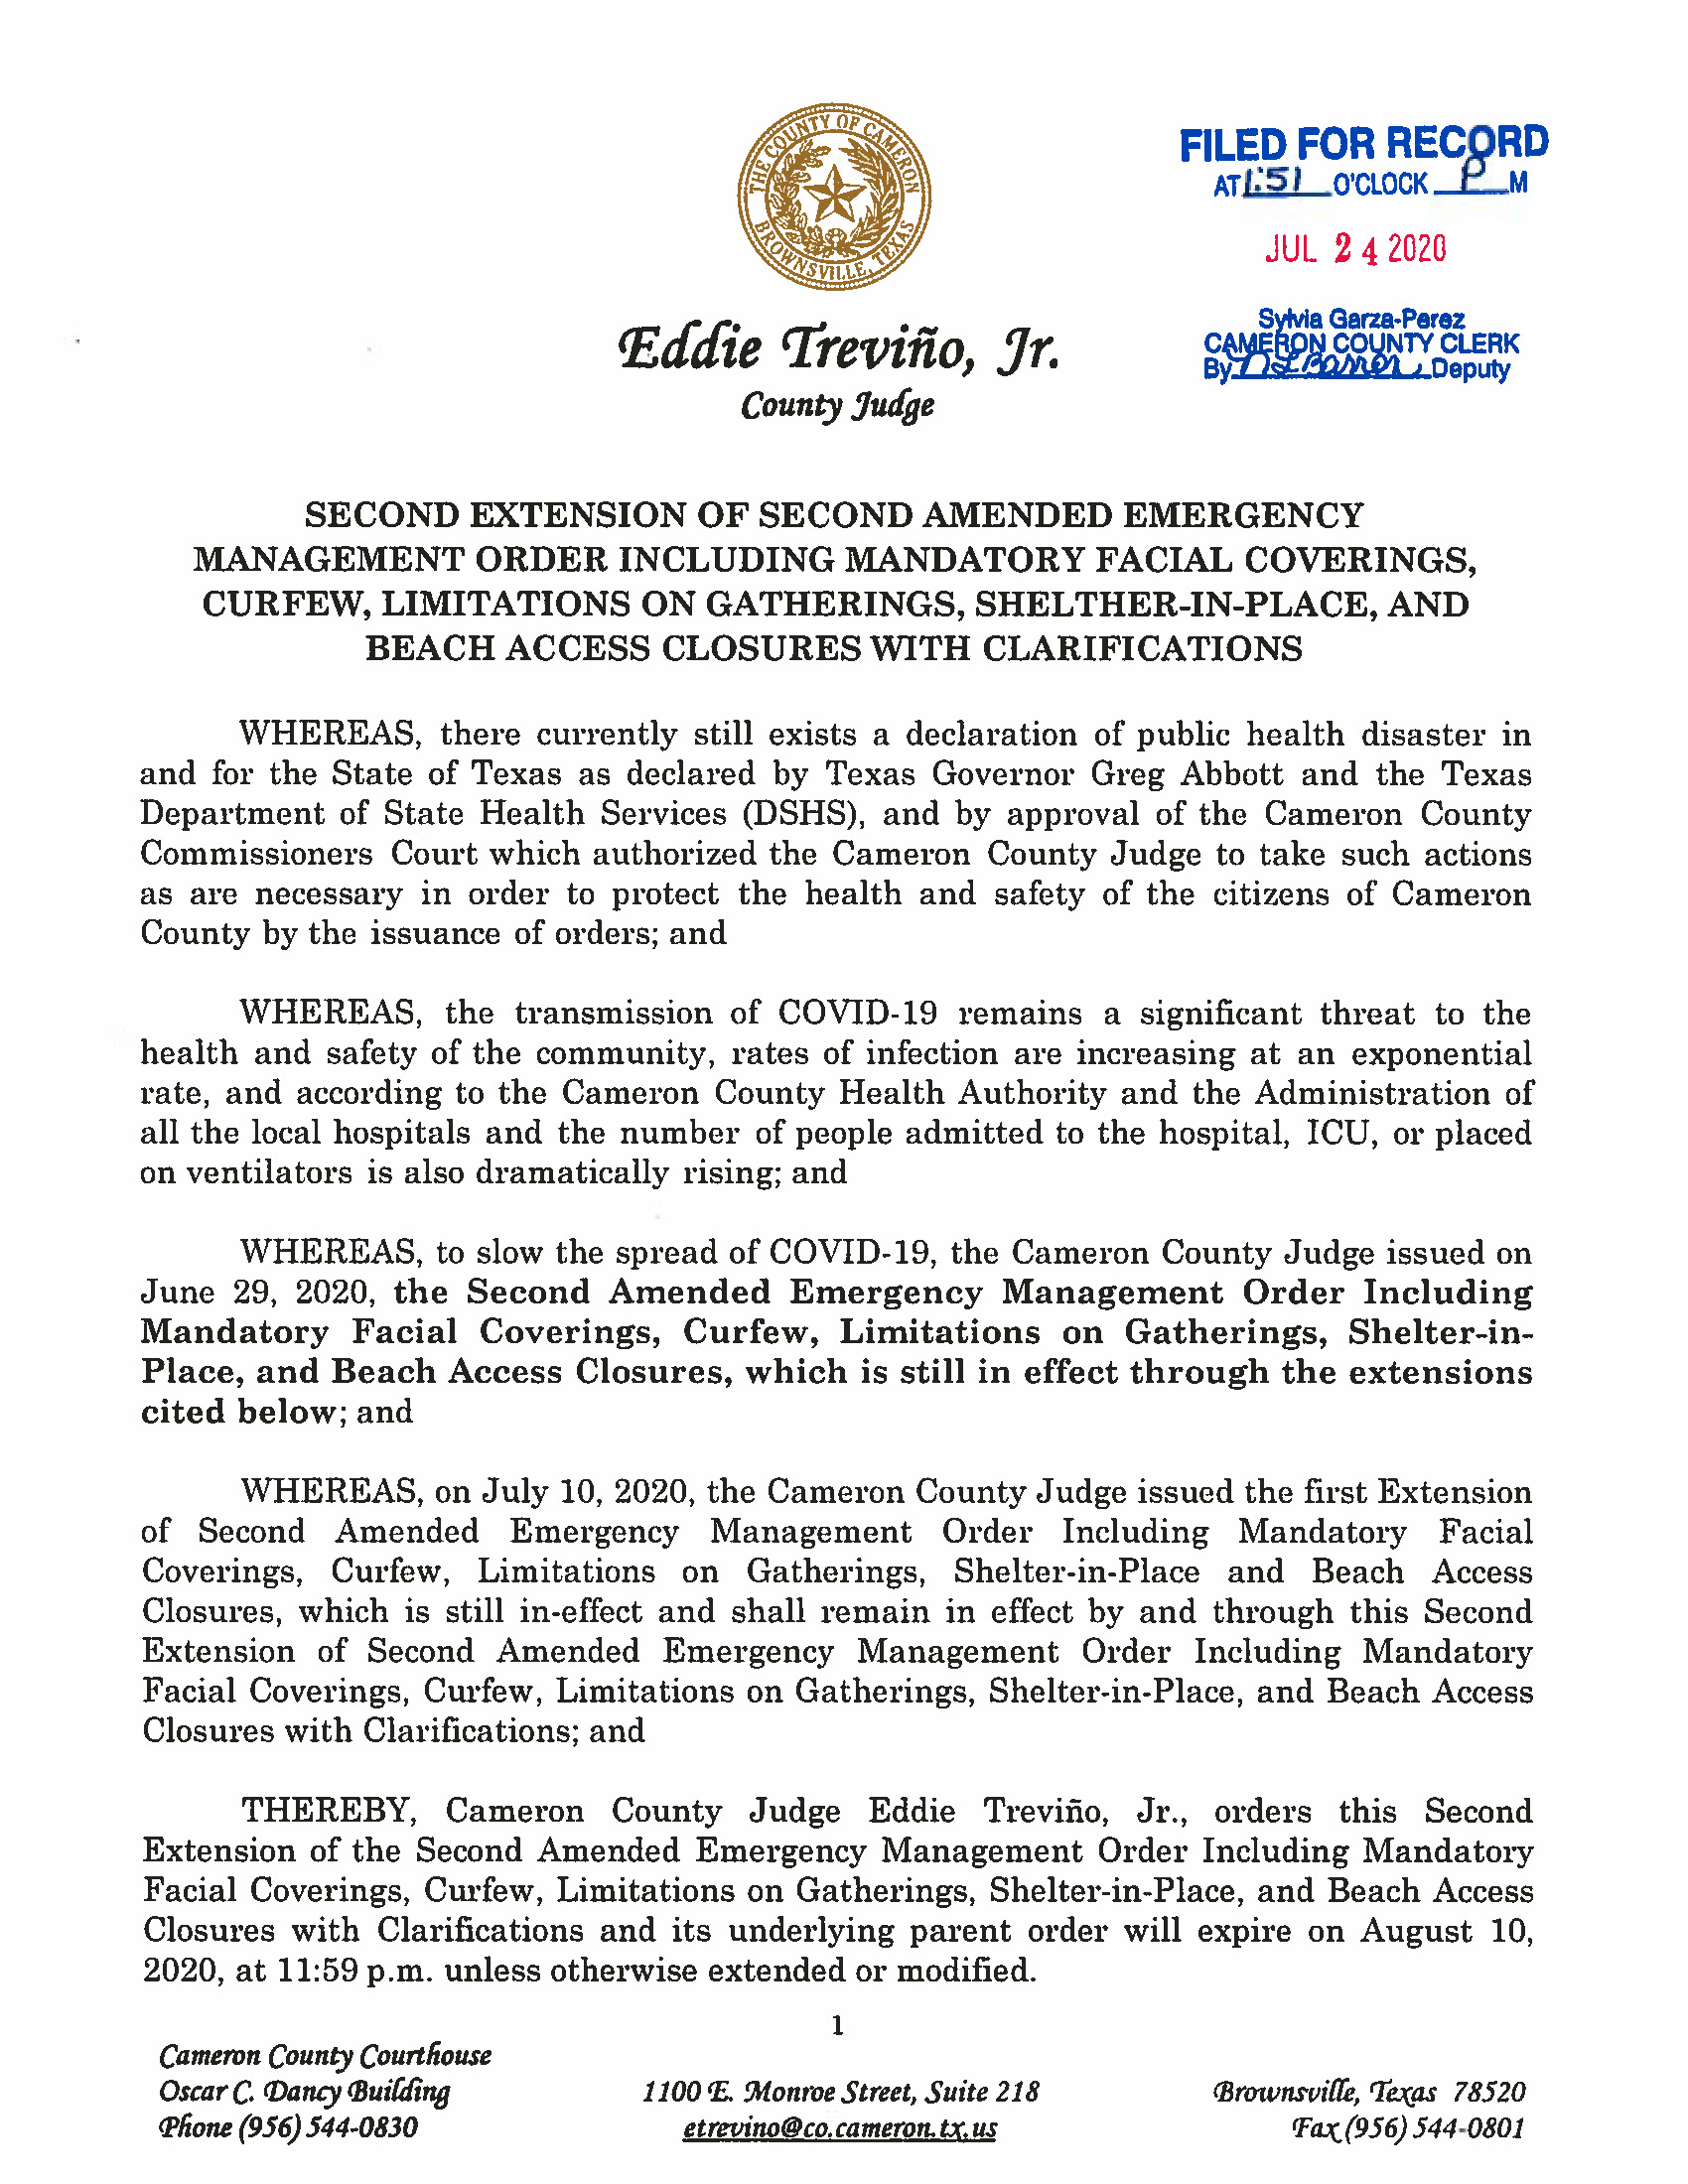 07.24.2020 ORDER Second Extension Of Second Amended Emergency Management Order Page 1